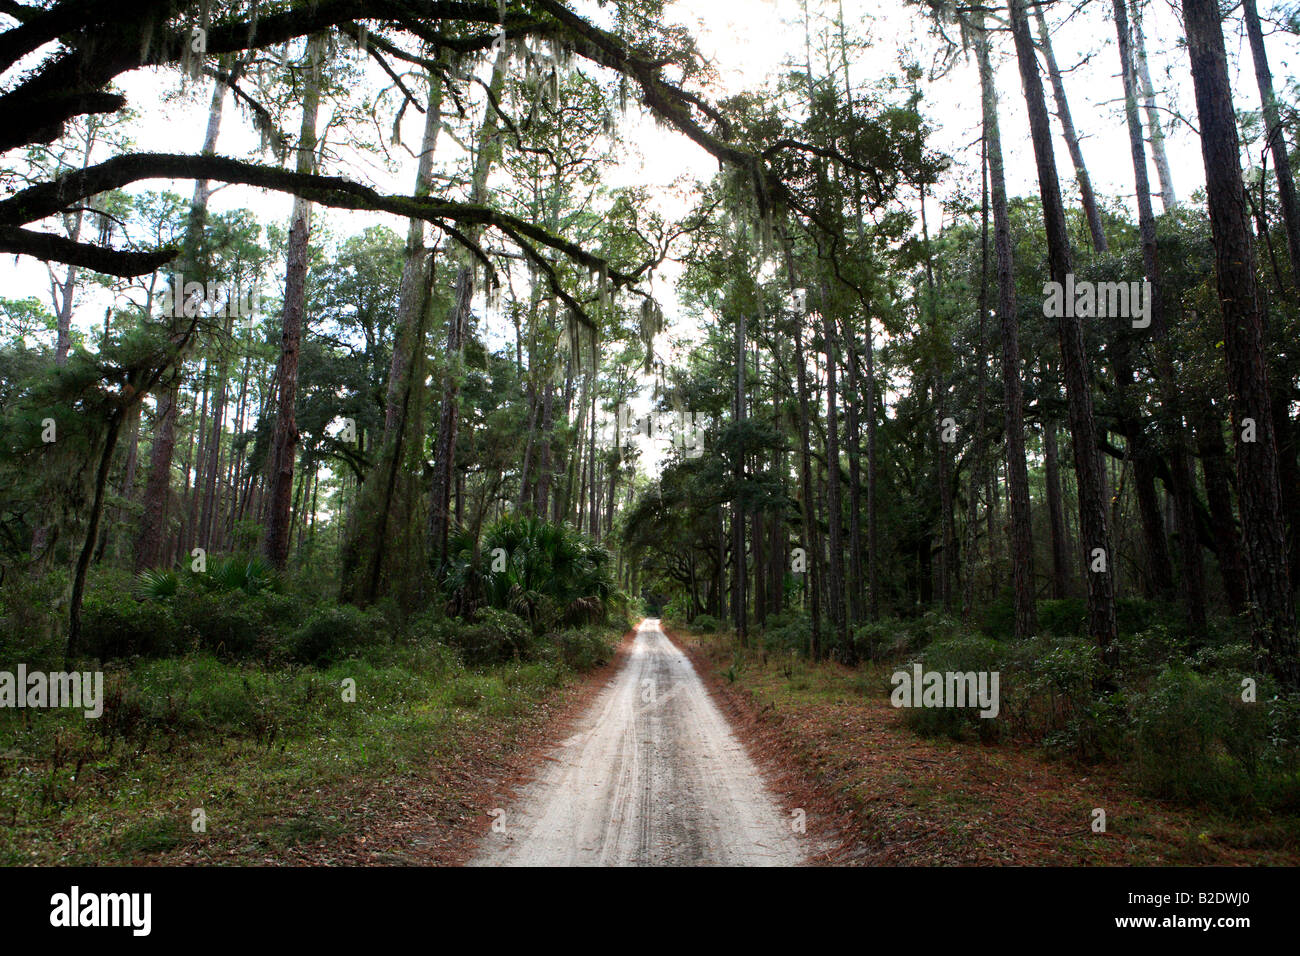 MAIN THROUGH THE LOBLOLLY PINE PINUS TAEDA FOREST IN THE WILDERNESS AREA SOUTH OF PLUM ORCHARD IN CUMBERLAND ISLAND NATIONAL SEA Stock Photo